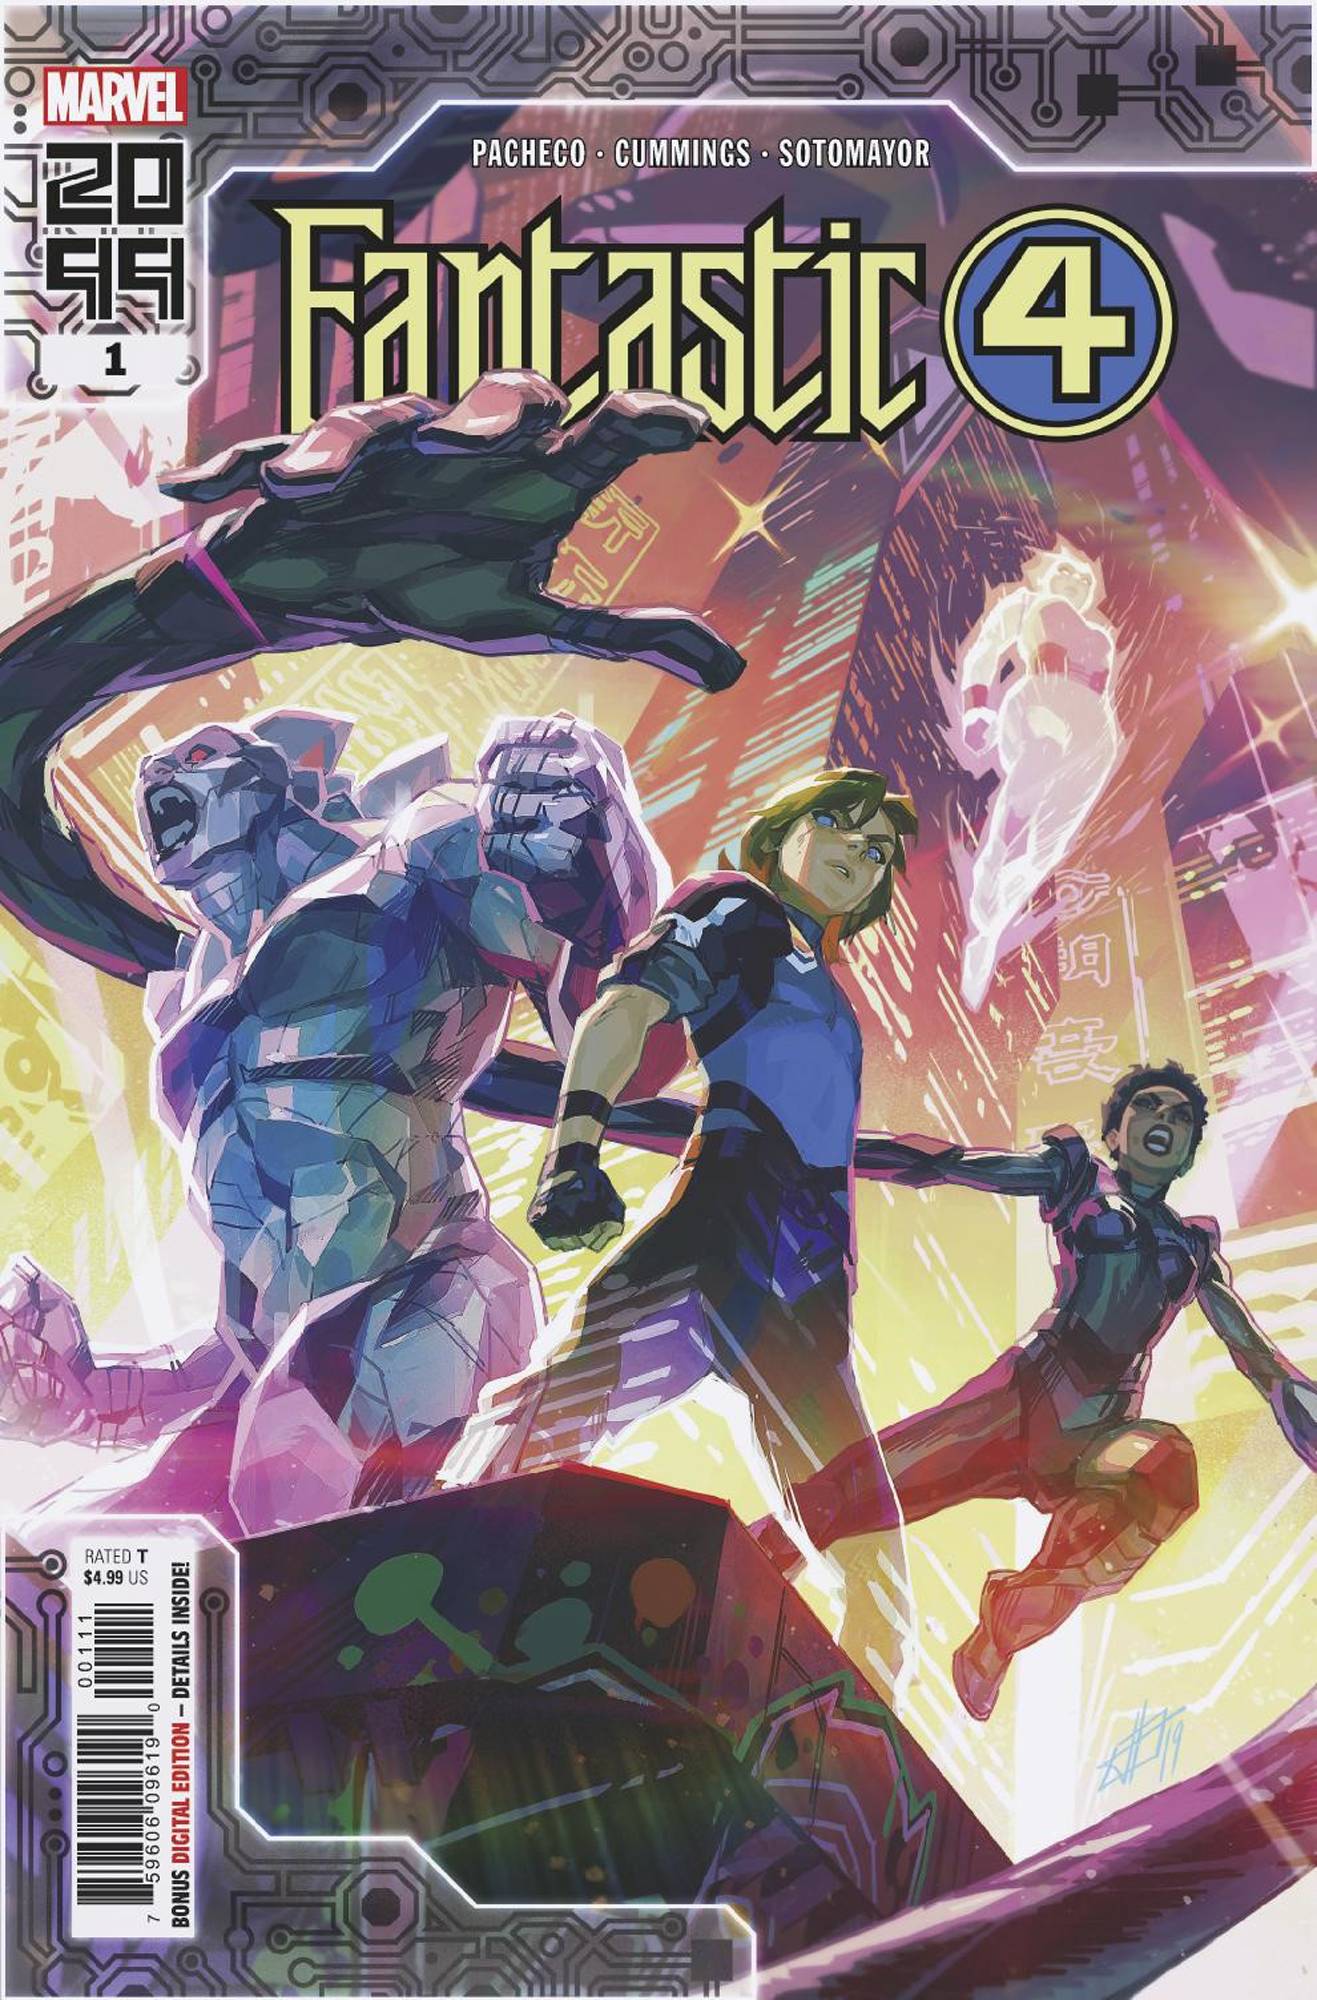 Fantastic Four 2099 1 - Heroes Cave